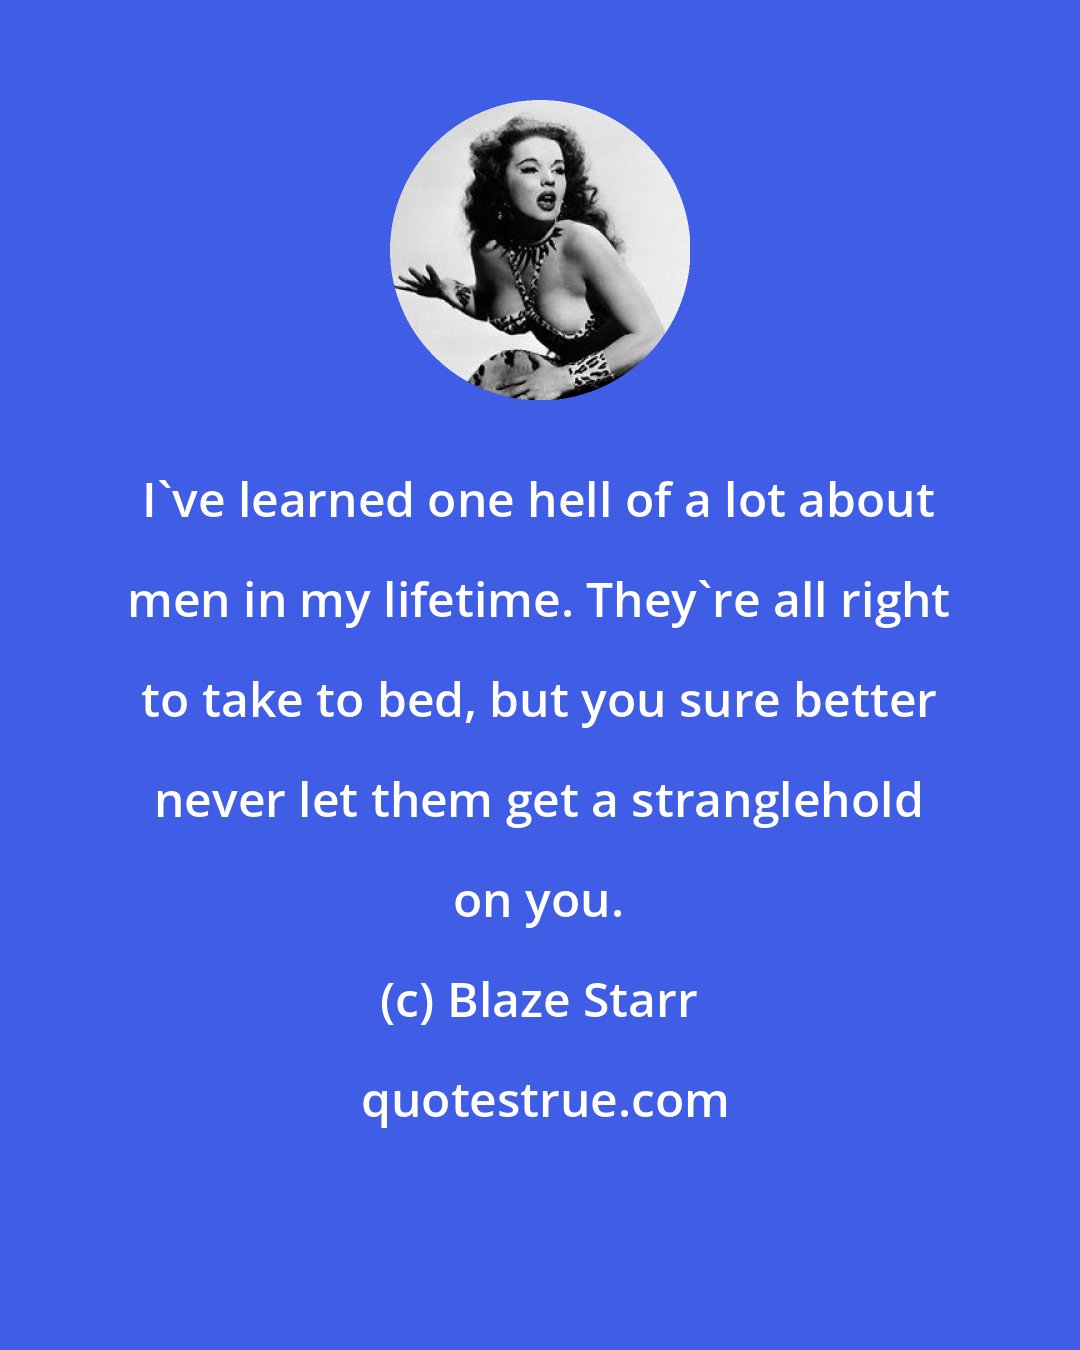 Blaze Starr: I've learned one hell of a lot about men in my lifetime. They're all right to take to bed, but you sure better never let them get a stranglehold on you.